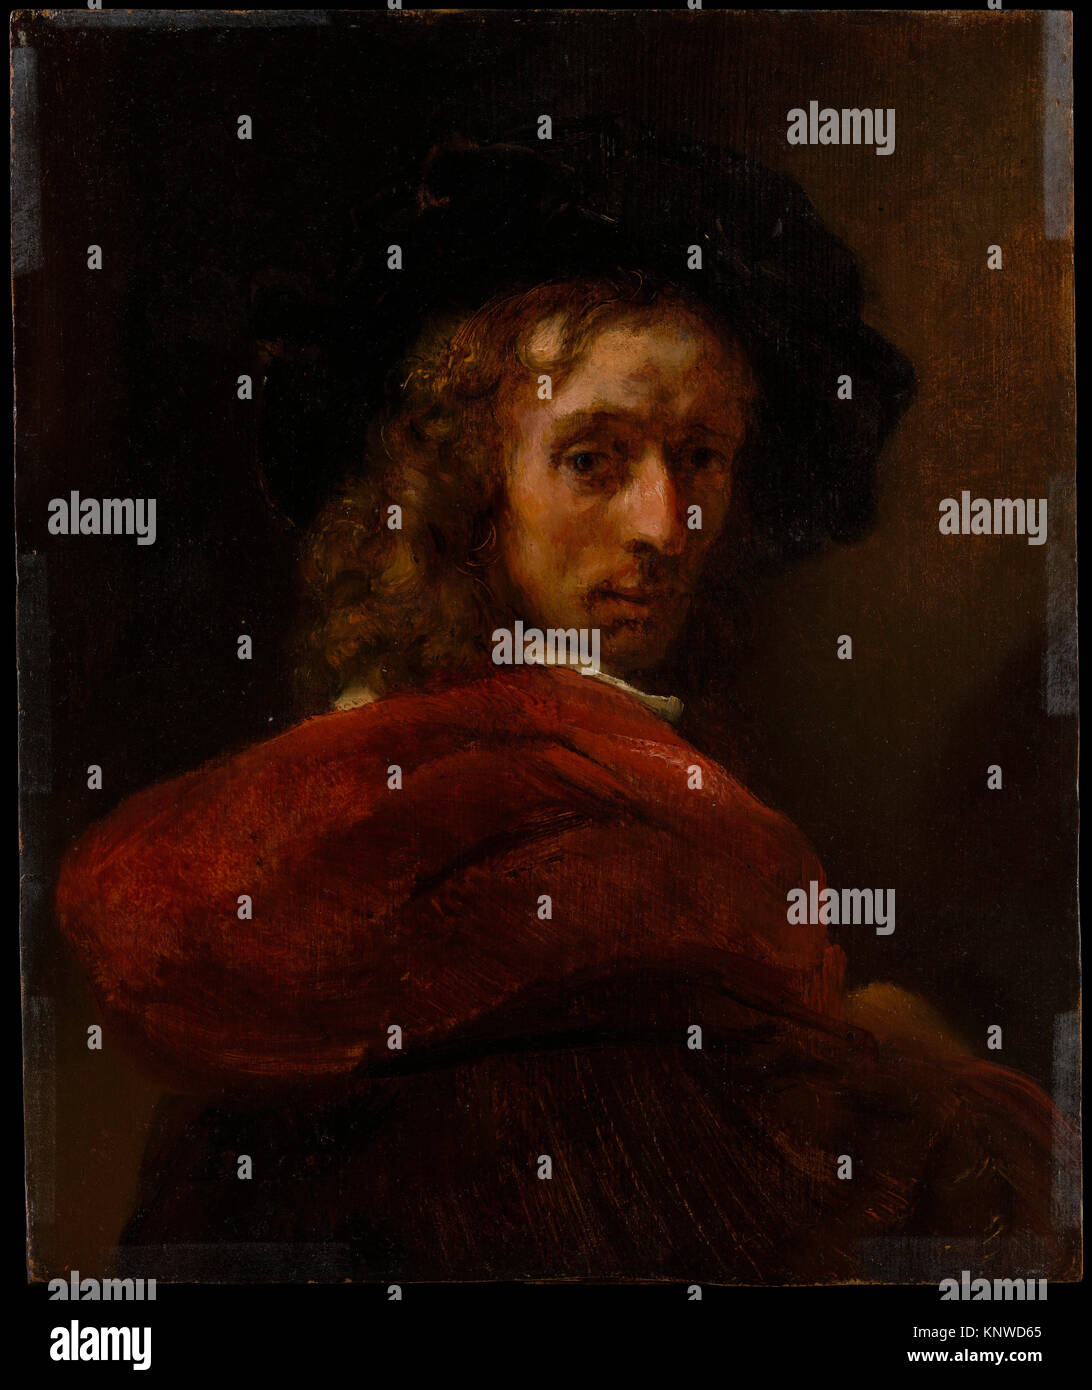 Man in a Red Cloak. Artist: Style of Rembrandt (Dutch, 1650s or early ...